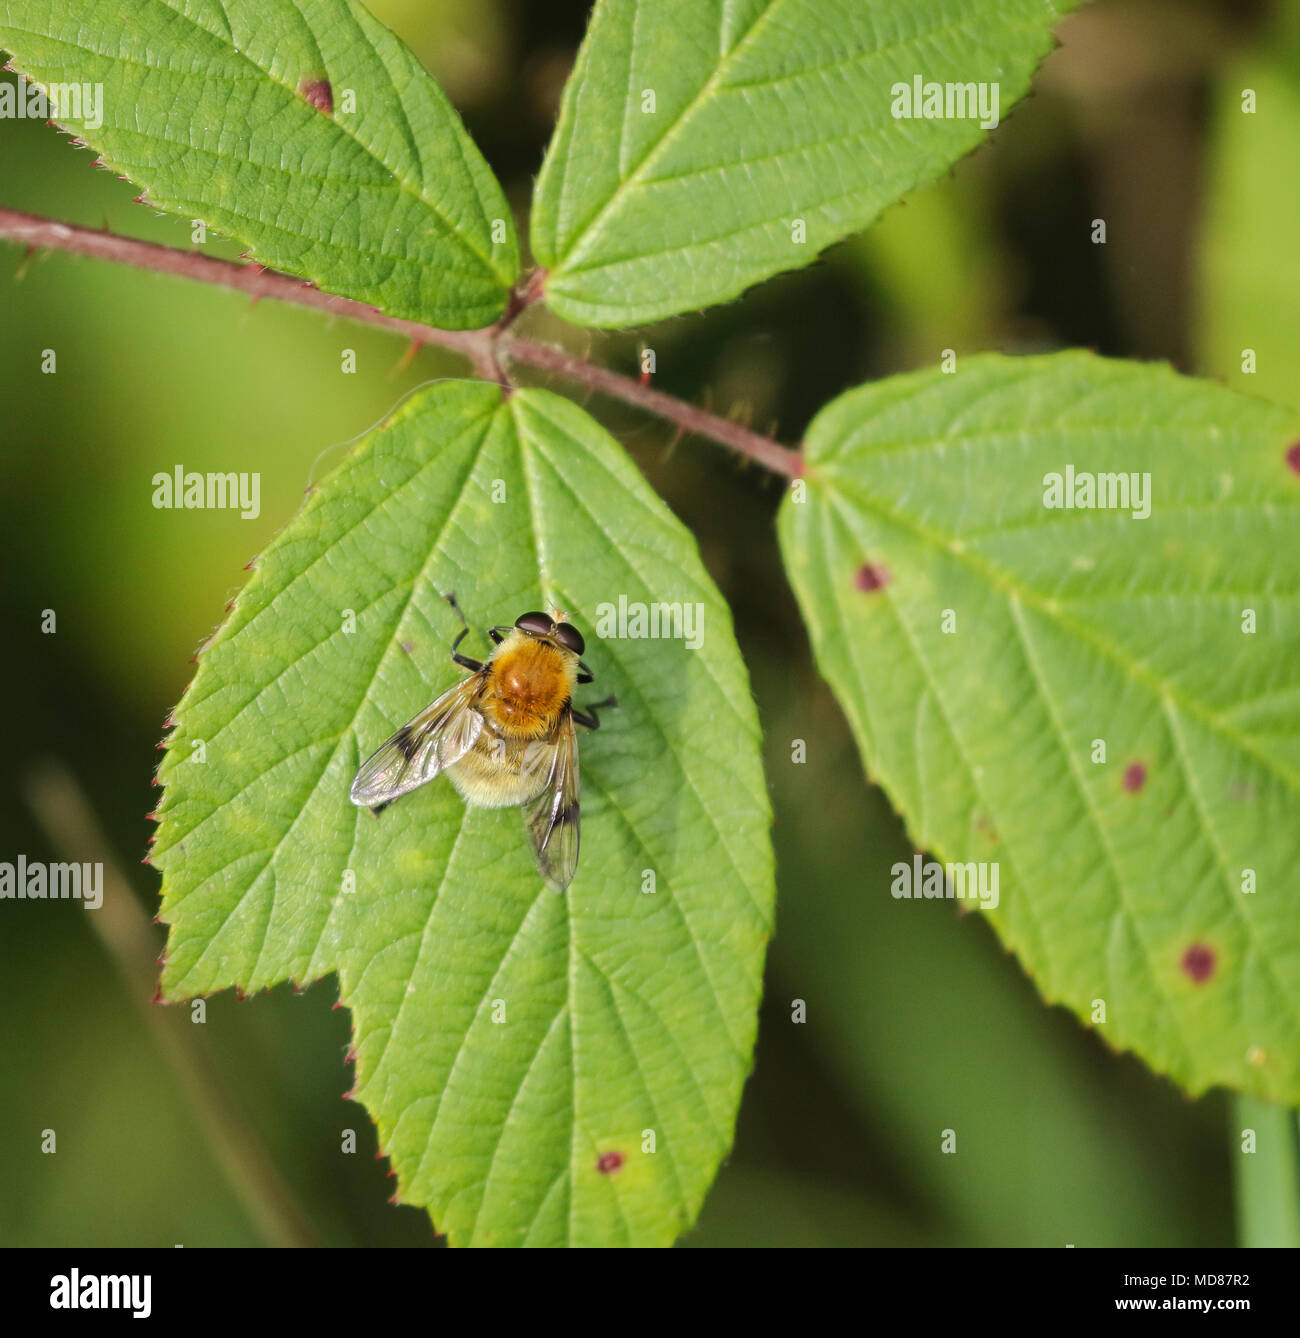 A Tree Bumblebee ( Bombus hypnorumon) on a blackberry leaf. The leaf is showing signs of rust fungus. Stock Photo